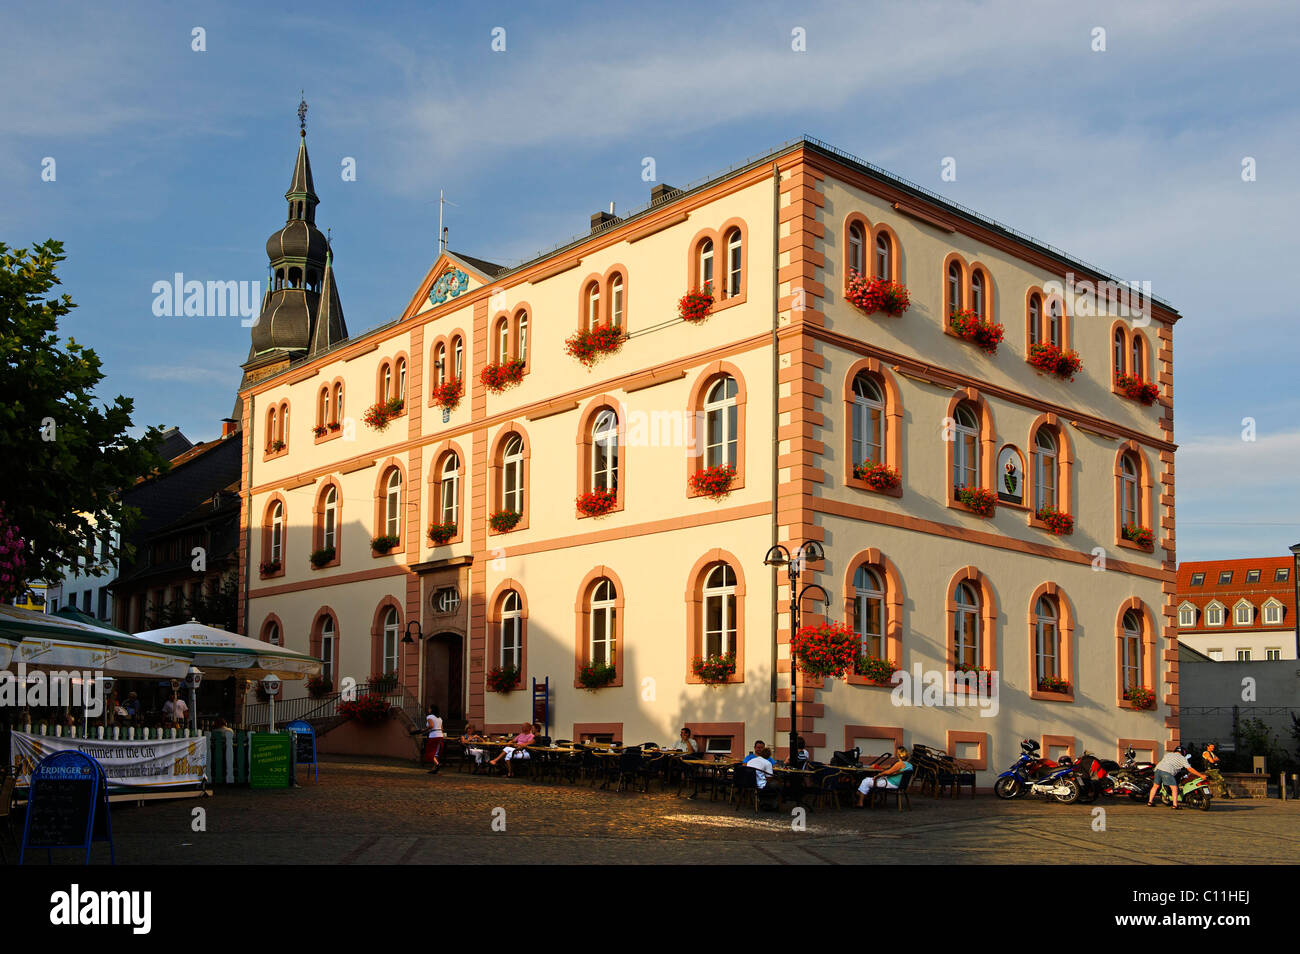 Town hall of St. Wendel, Saarland, Germany, Europe Stock Photo